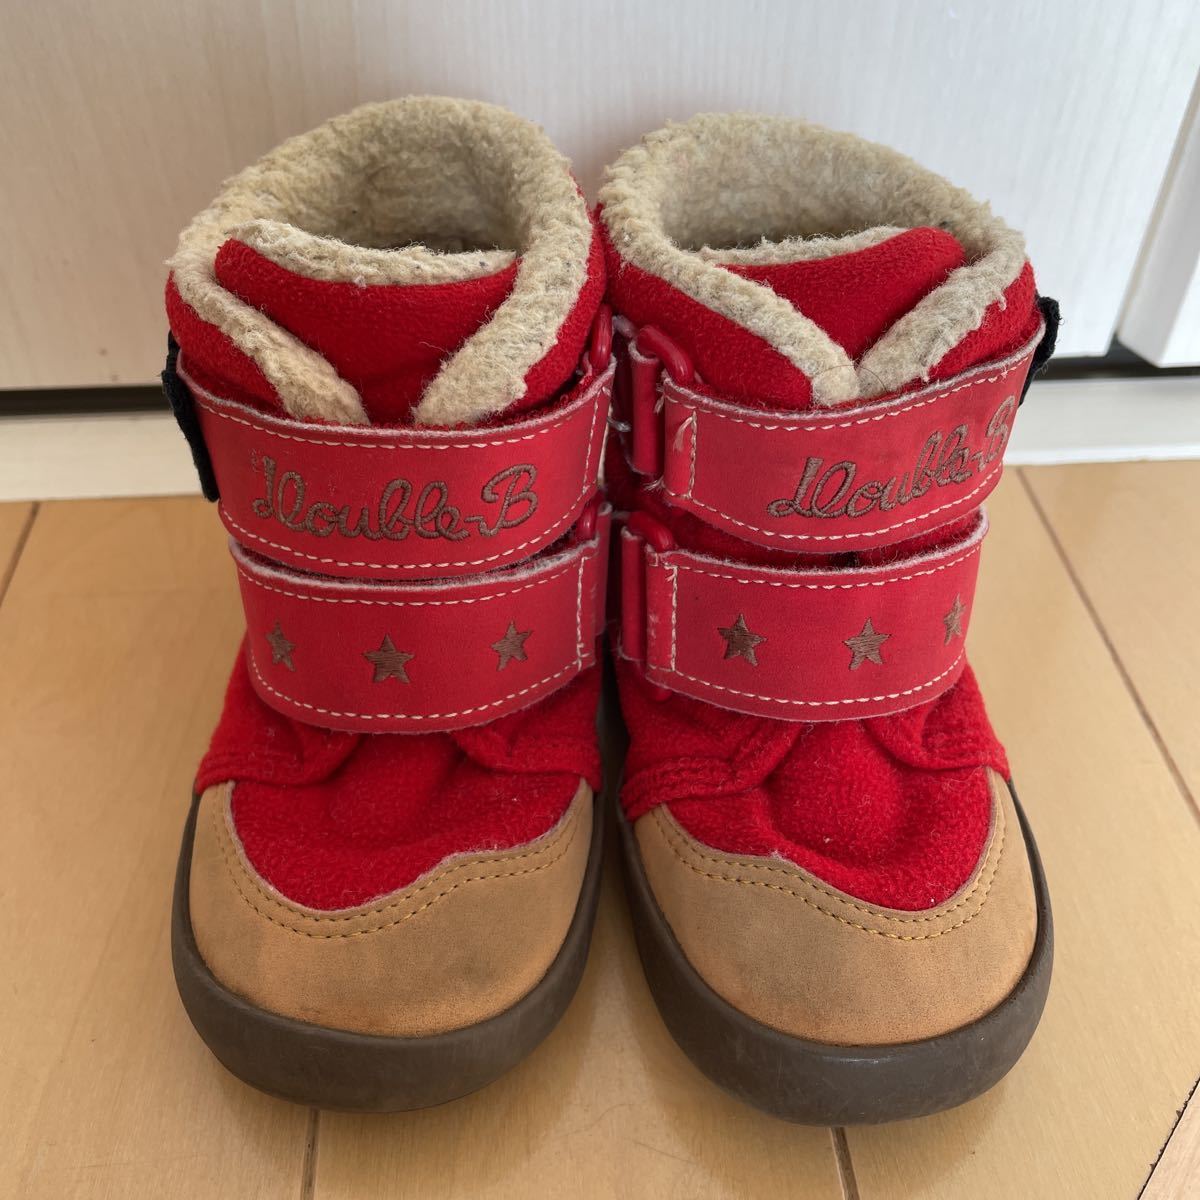 Miki House Double B Miki House DoubleB Boots Red Red 13 см. Гендерная комбинация